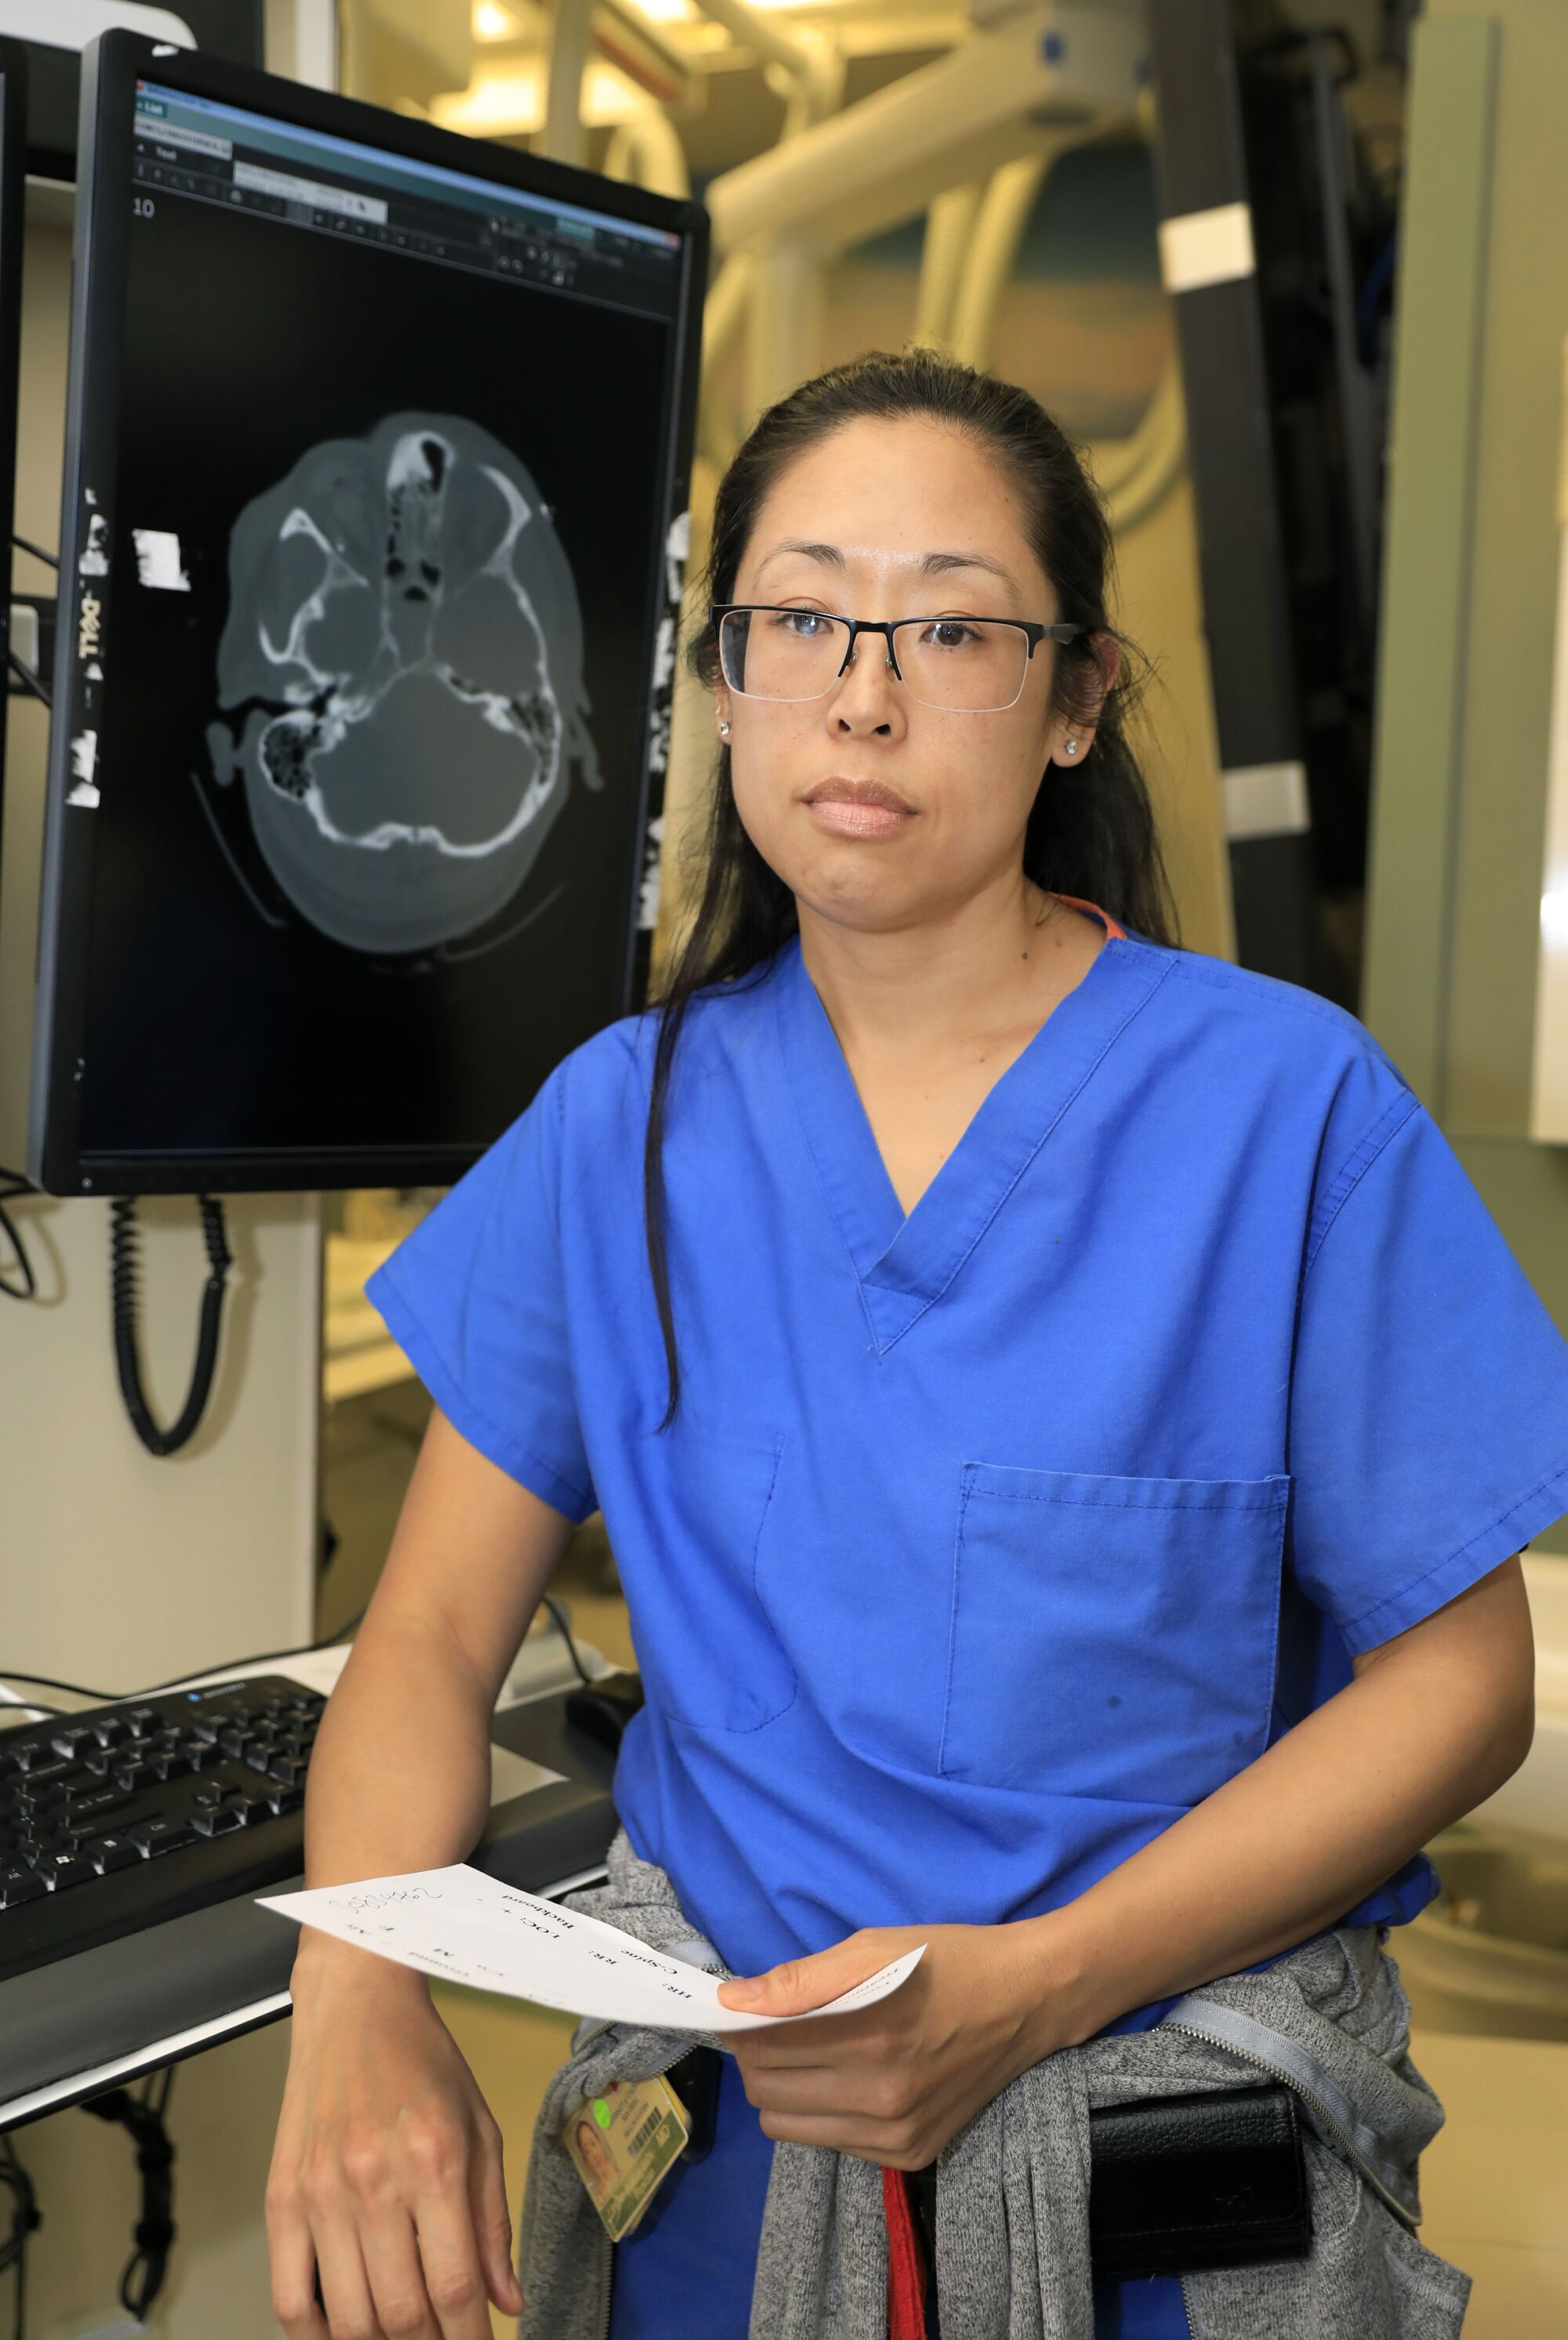 Dr. Leslie Kobayashi, a trauma surgeon at UC San Diego Medical Center in Hillcrest is pictured with an x-ray image of a head injury in the trauma area of the emergency room.